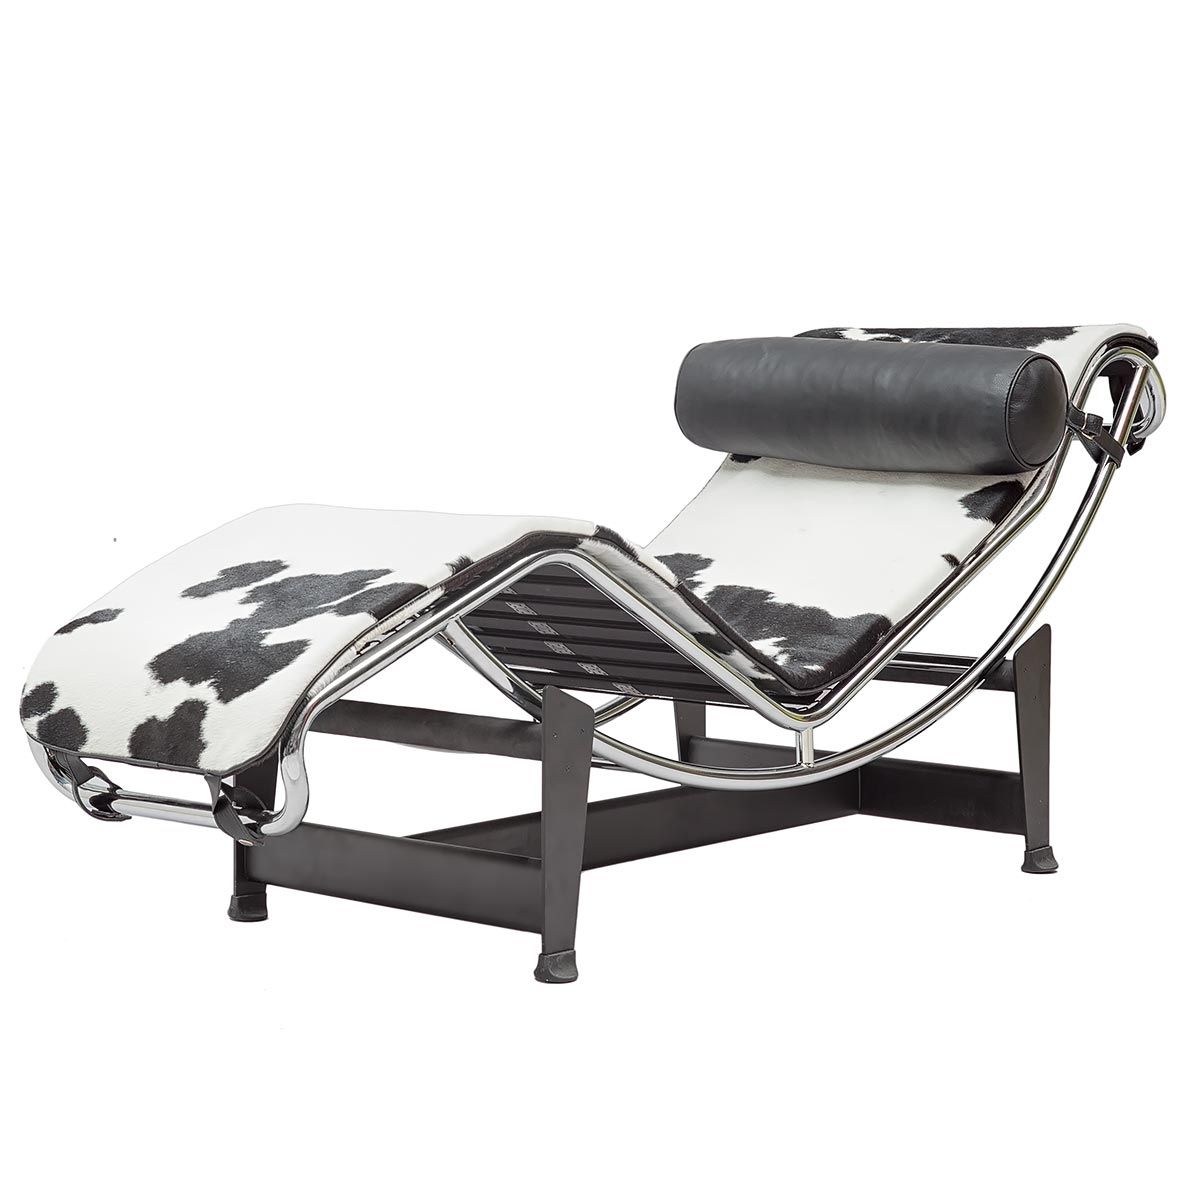 A Steelform Design Classic Within Le Corbusier Chaises (View 8 of 15)